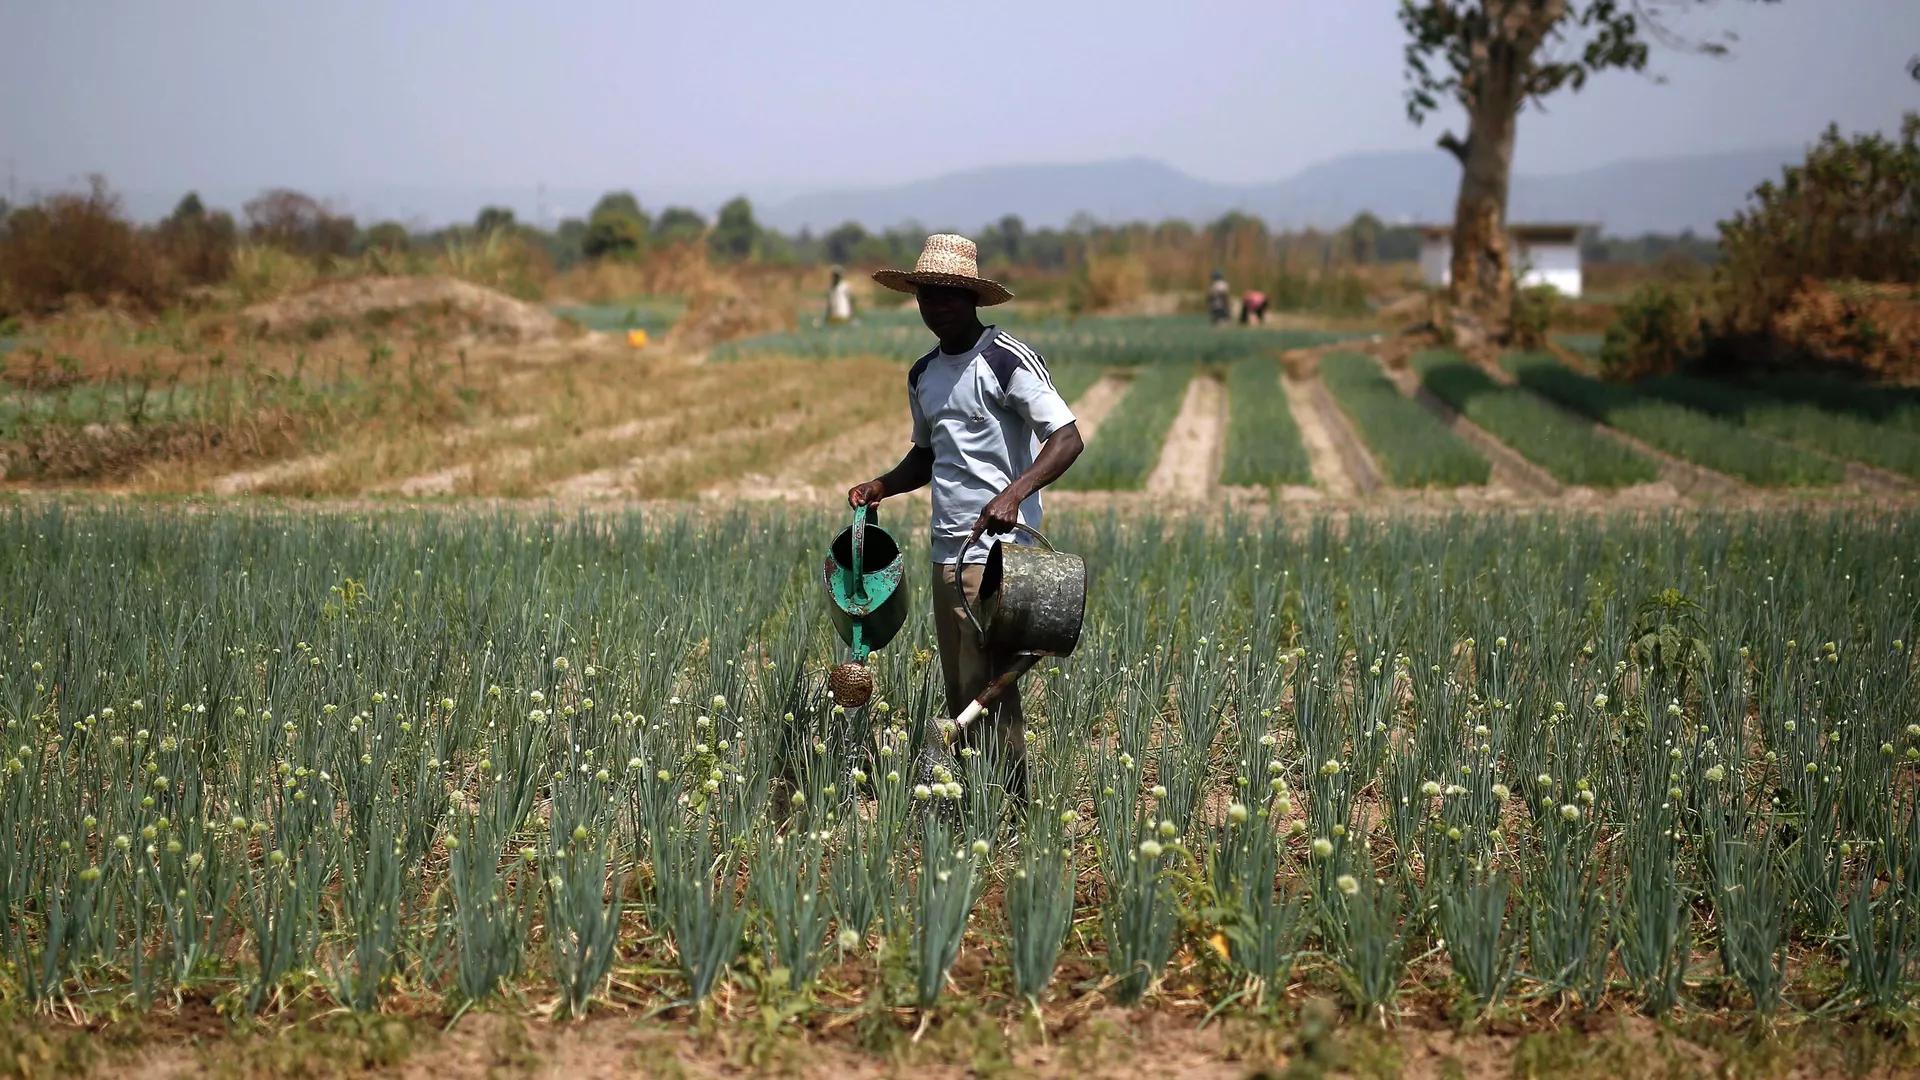 African Development Bank Allocates $30 Billion to Boost Food Production in Continent